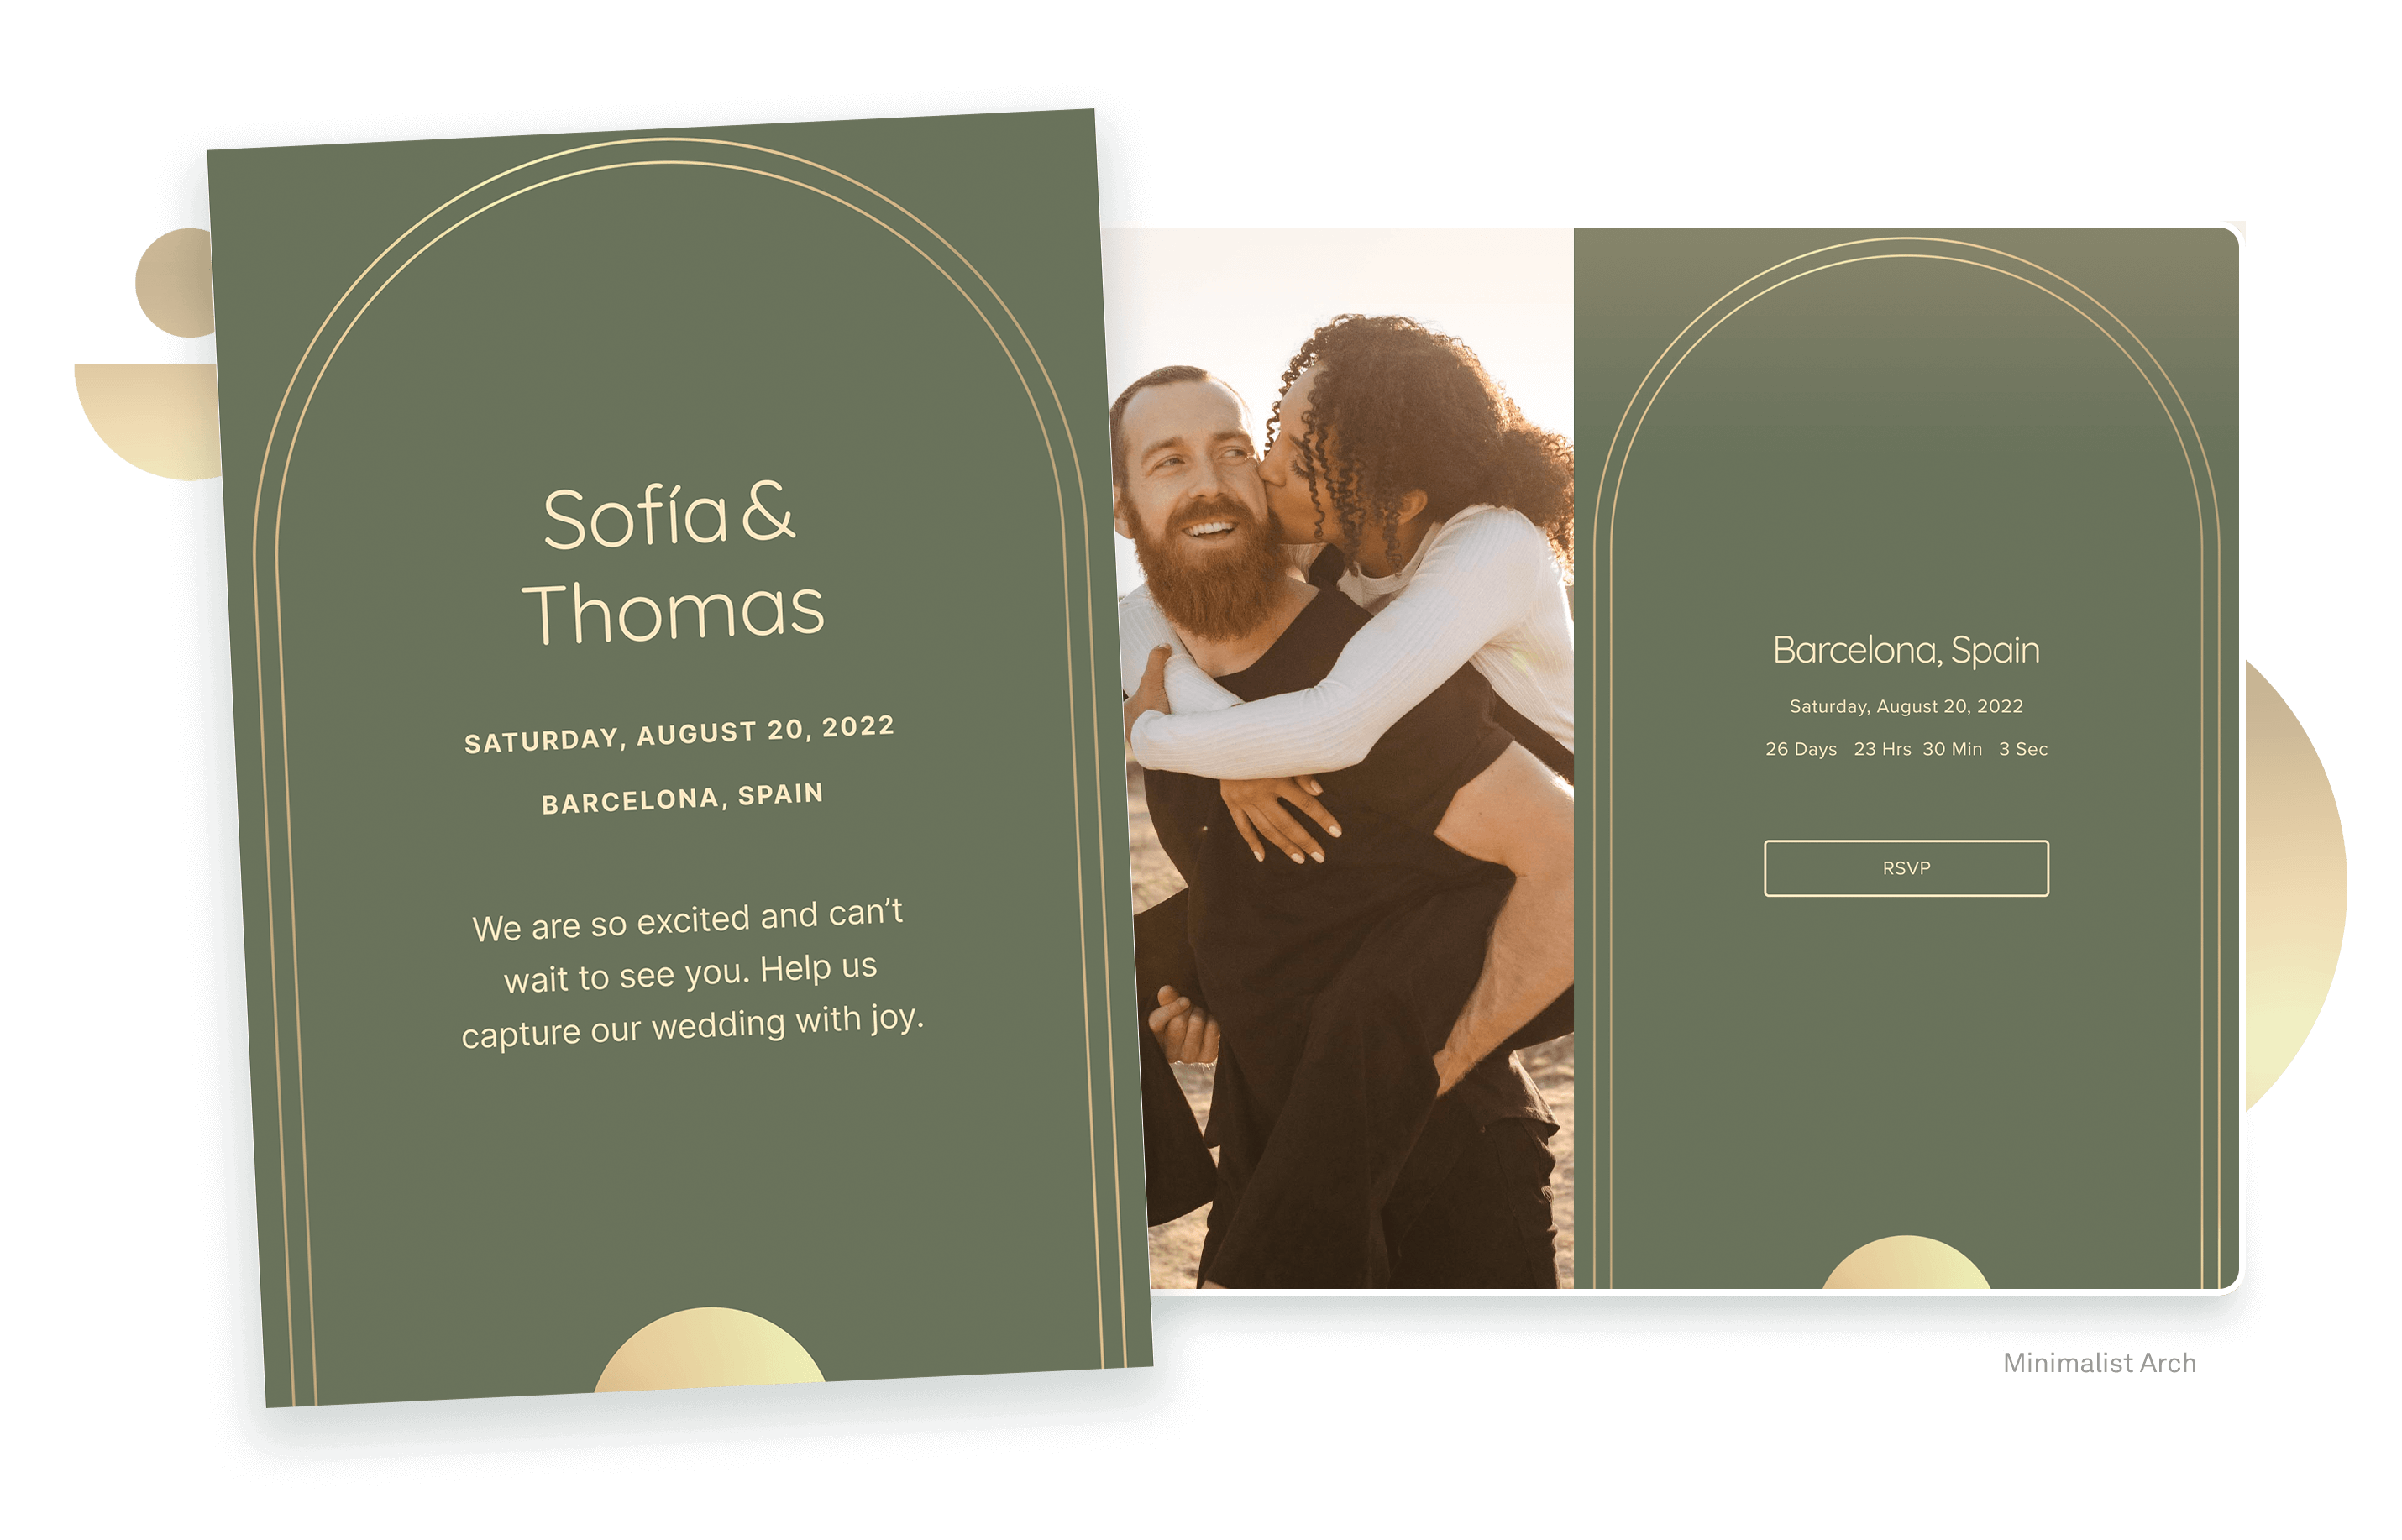 Online Wedding Invitations with RSVP Tracking